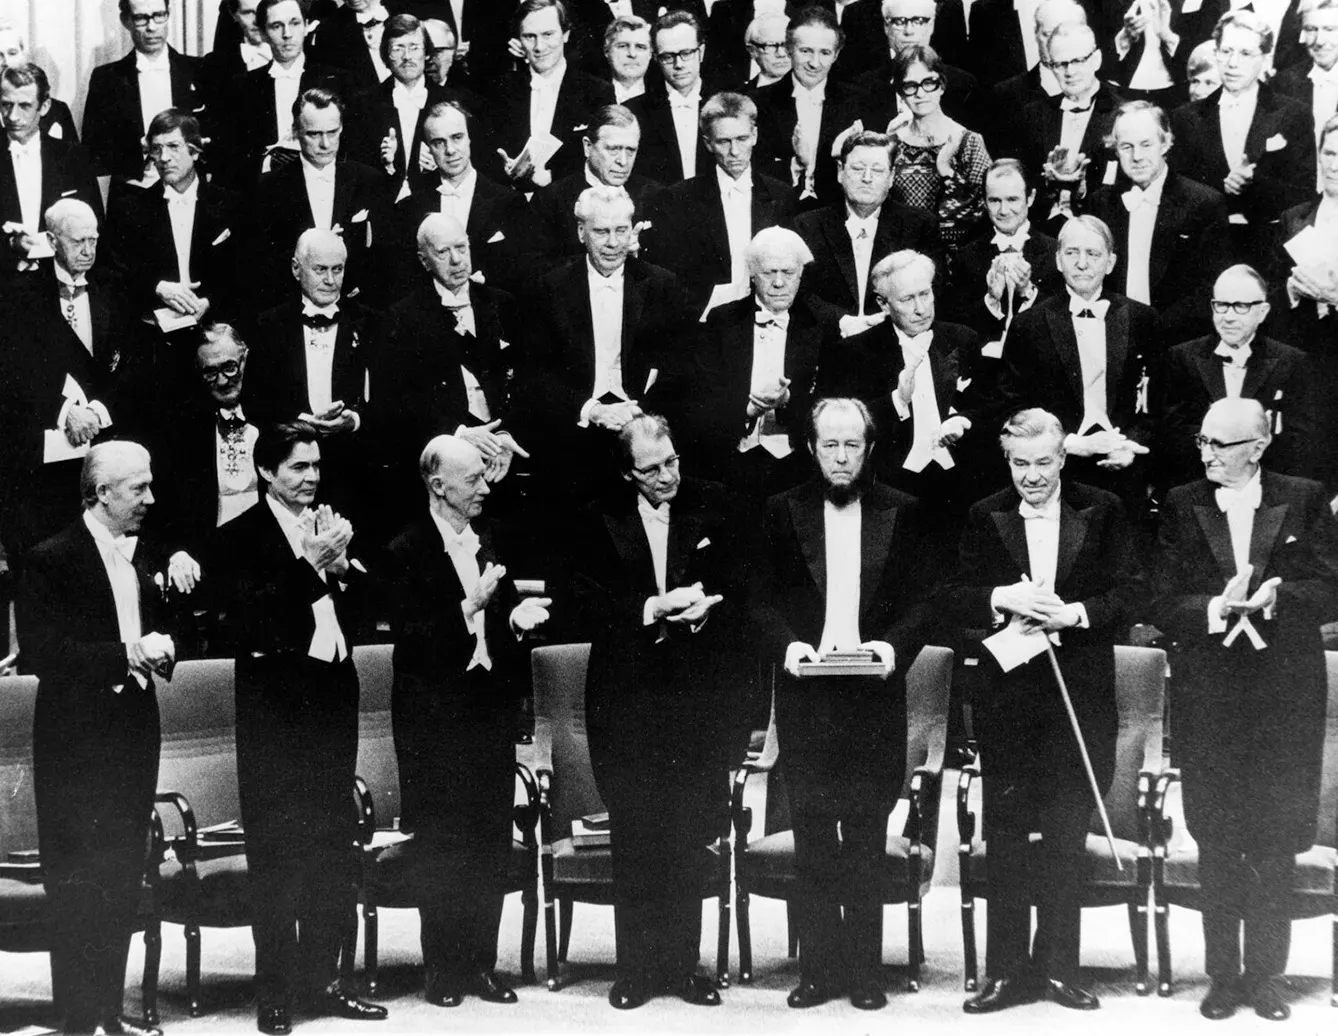 In a ceremony at the Concert Hall in Stockholm, King CARL GUSTAV presented Nobel Prizes